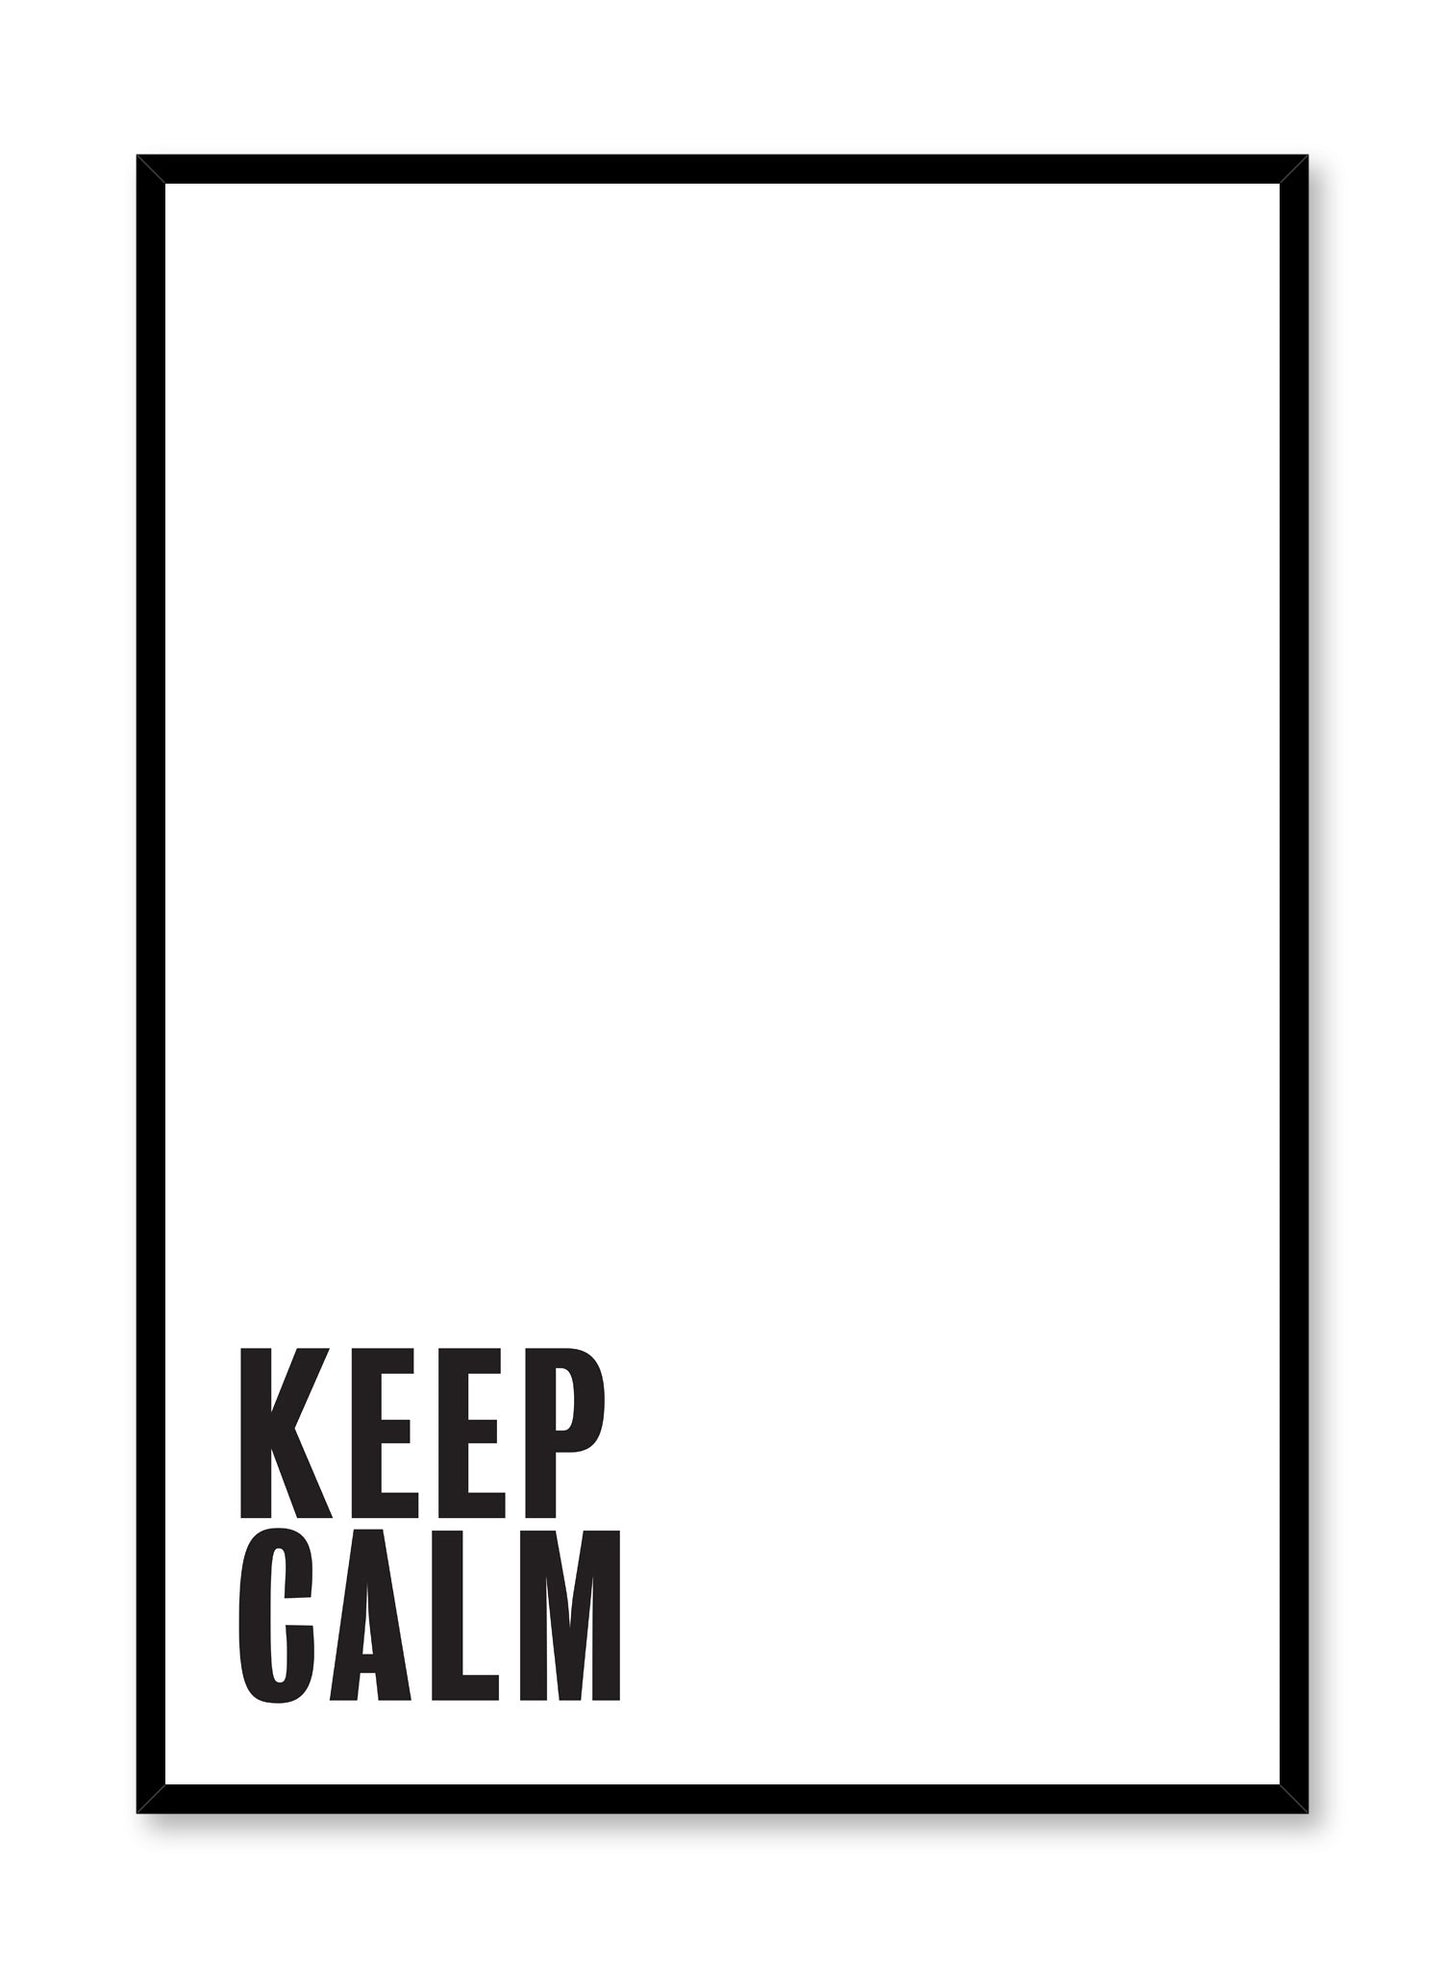 Scandinavian poster by Opposite Wall with Keep Calm typography design